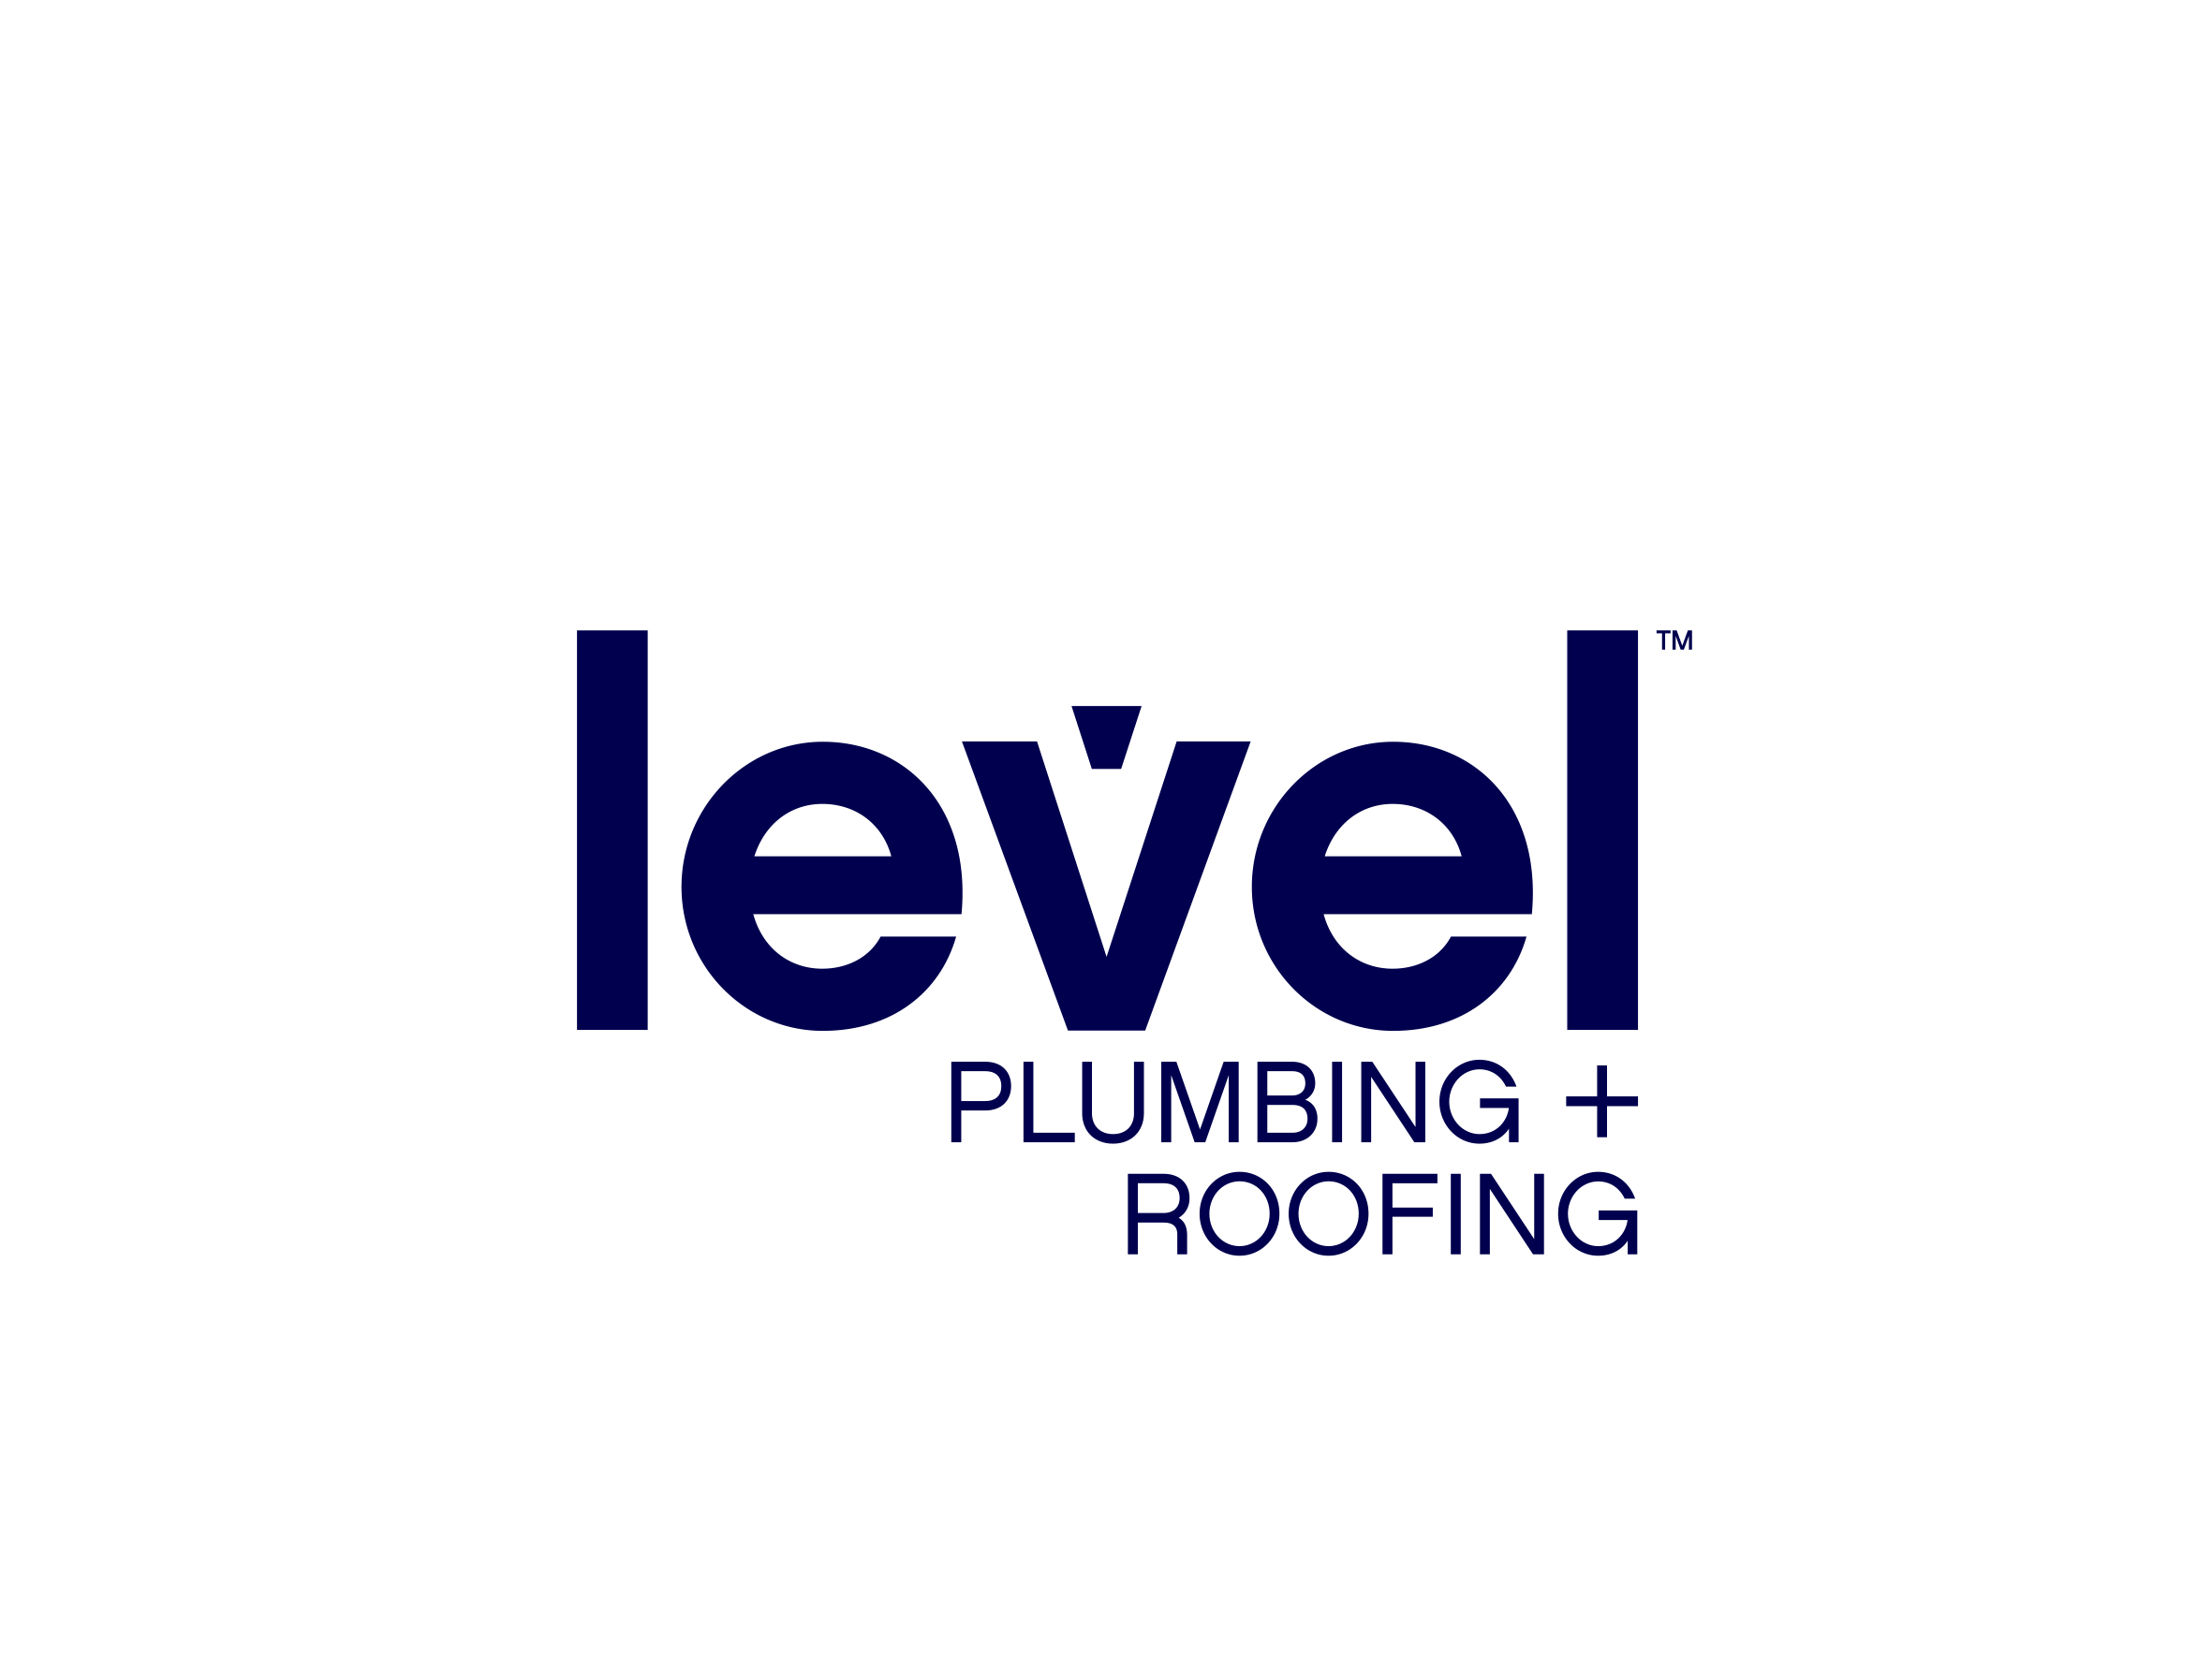 Level Plumbing & Roofing - Roof Condition Report